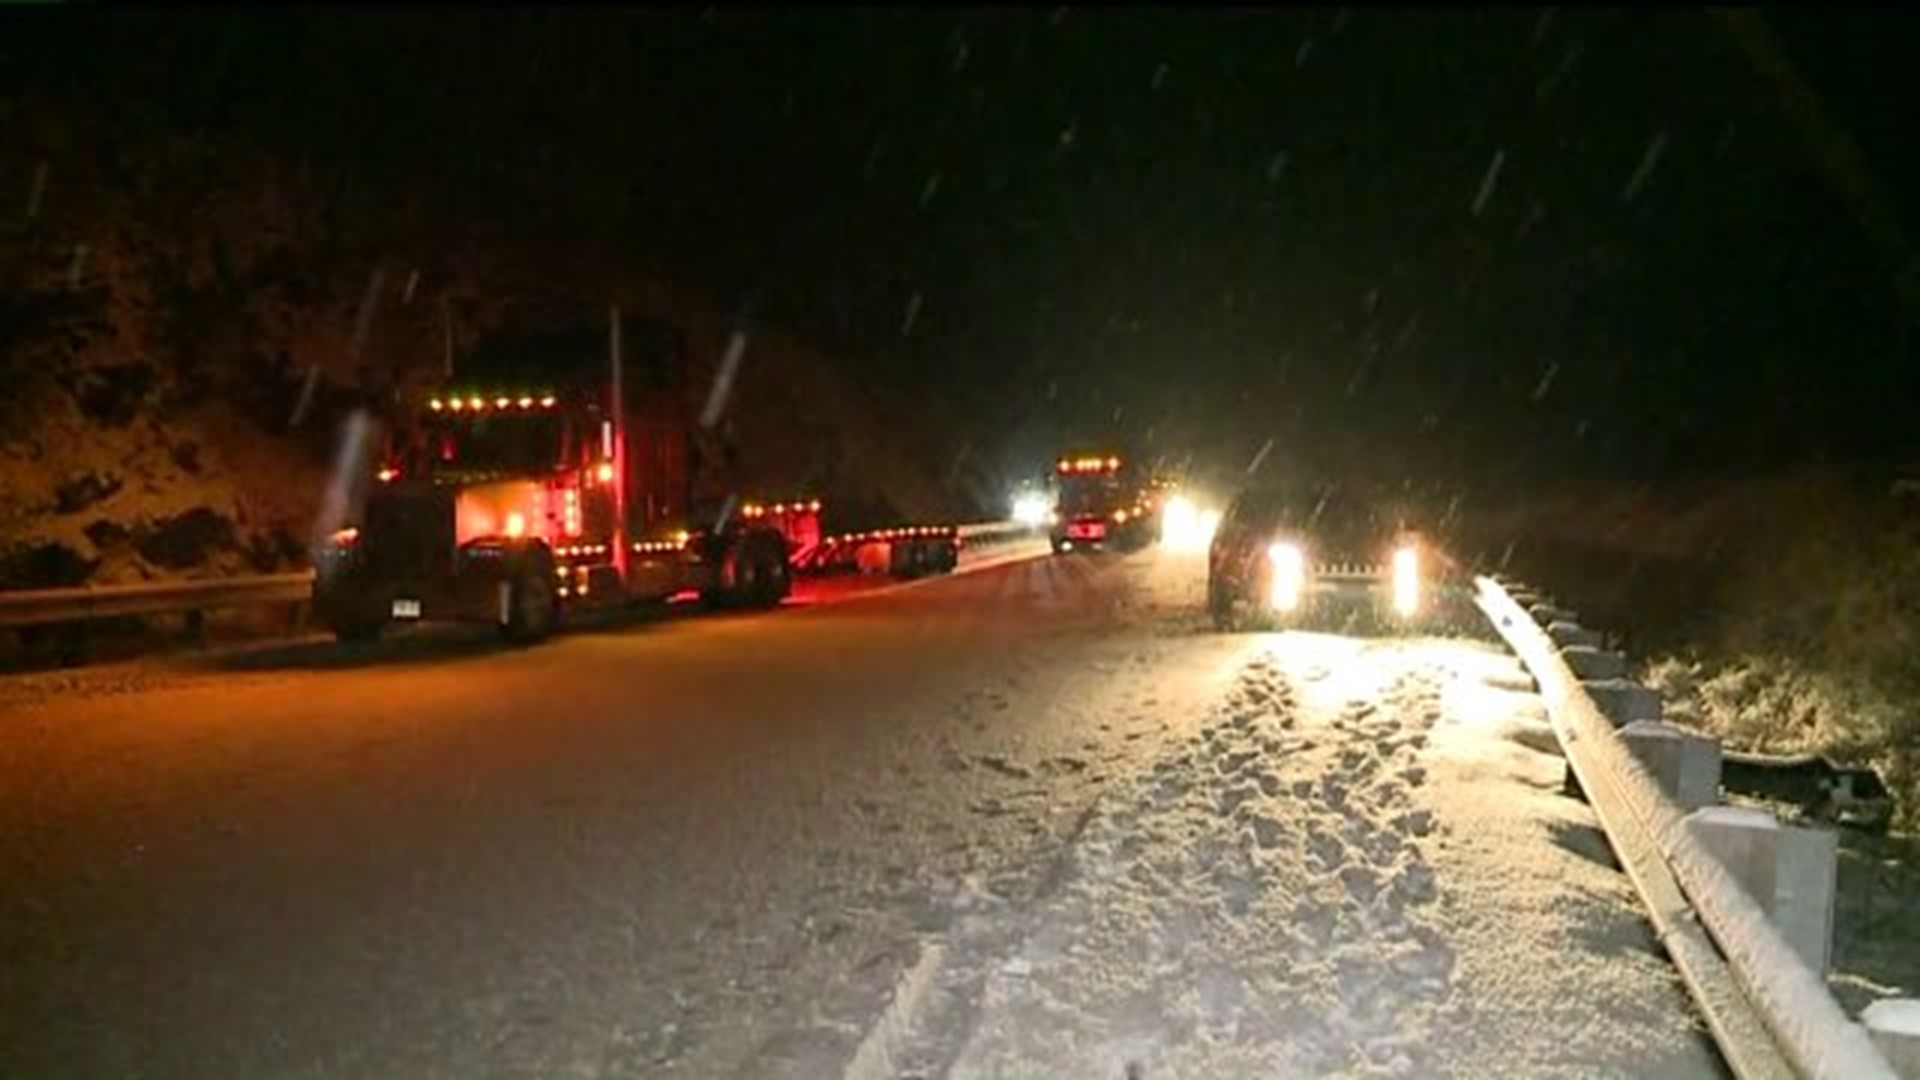 Part of I-80 Closed in Luzerne County Due to Multi-Vehicle Crash